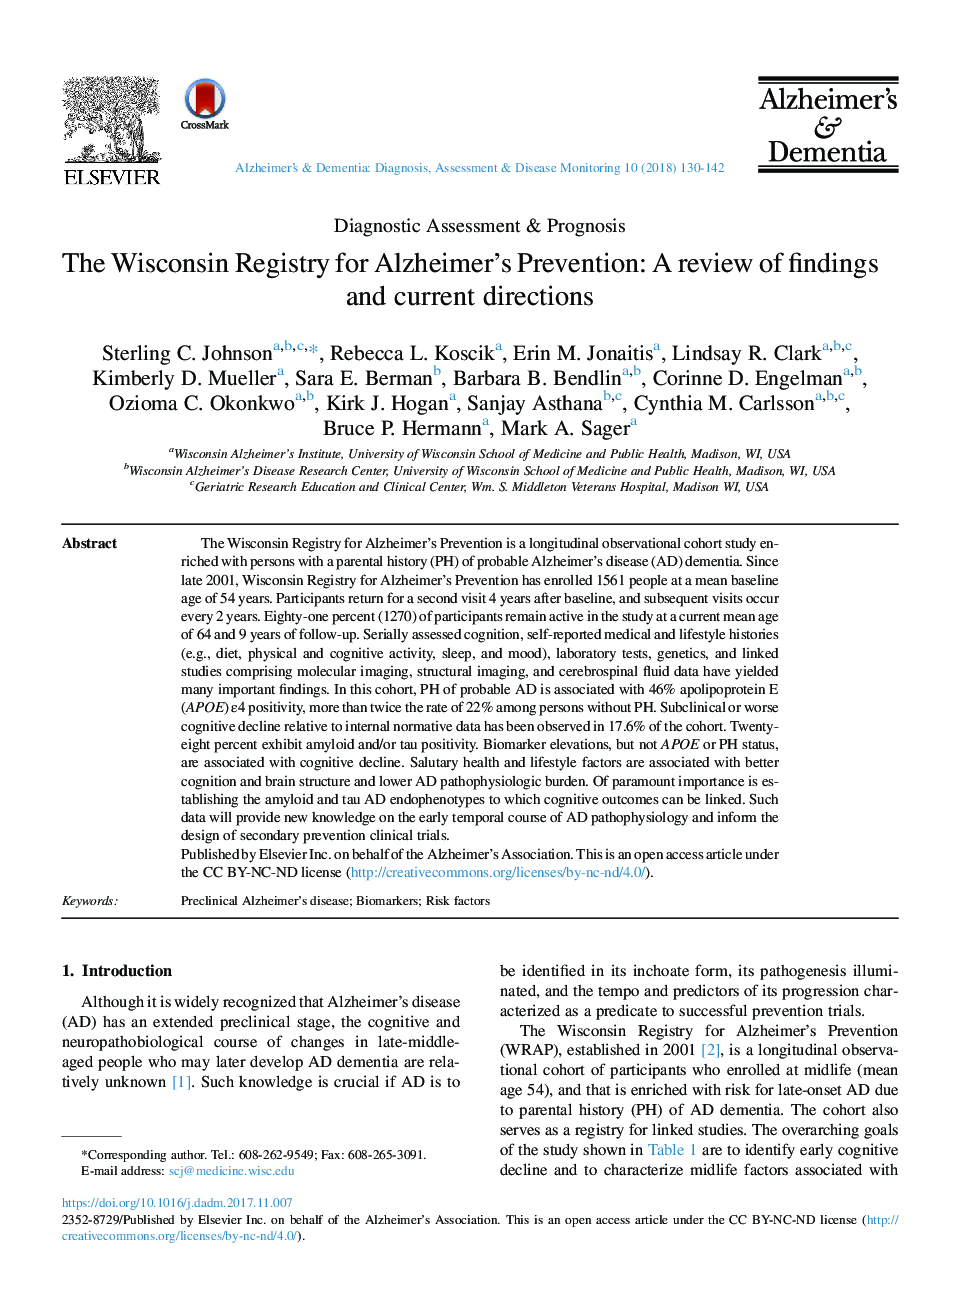 The Wisconsin Registry for Alzheimer's Prevention: A review of findings and current directions